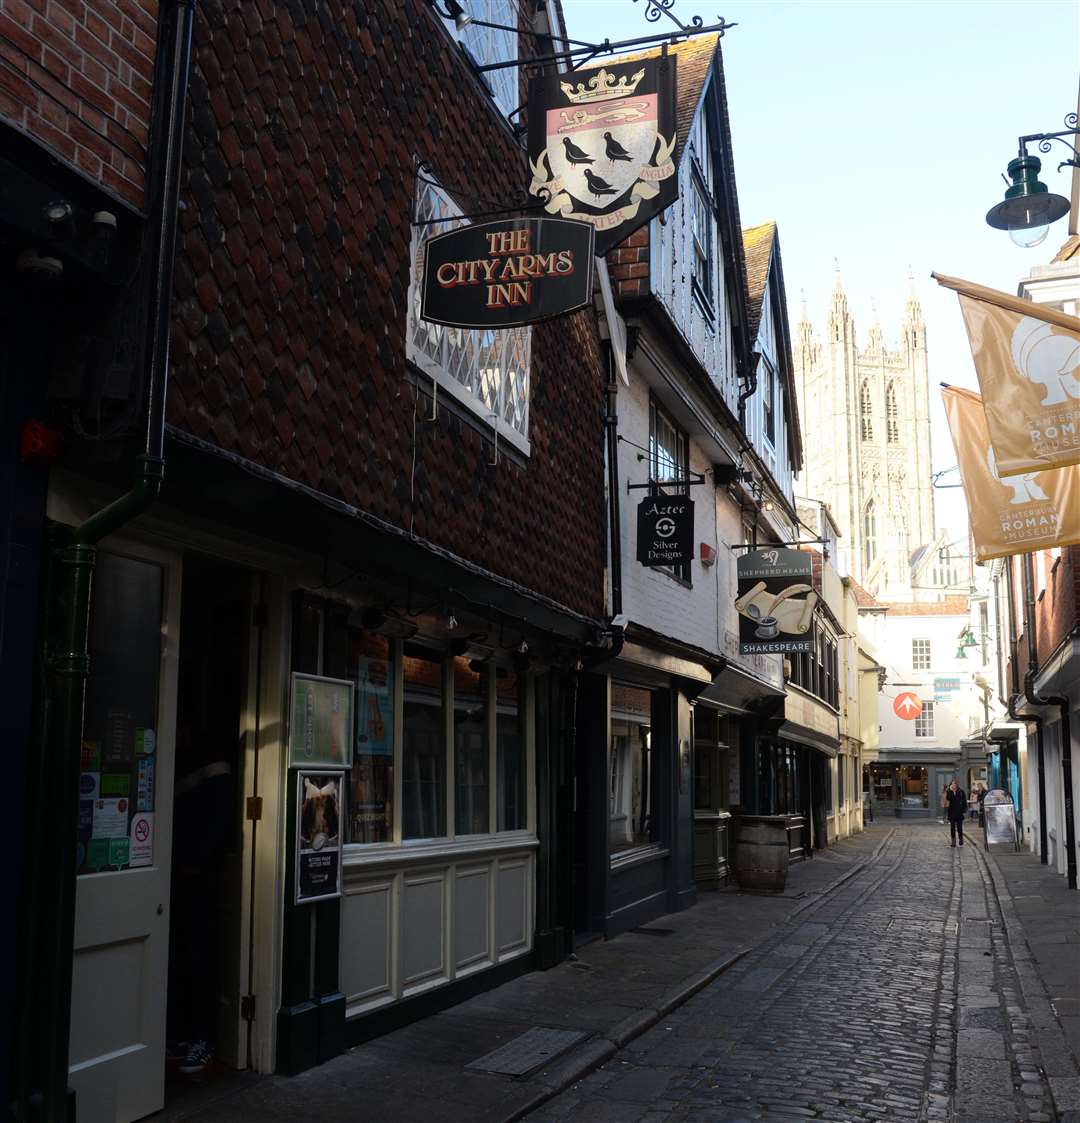 The City Arms in Canterbury has been operating as a pub since the 17th century